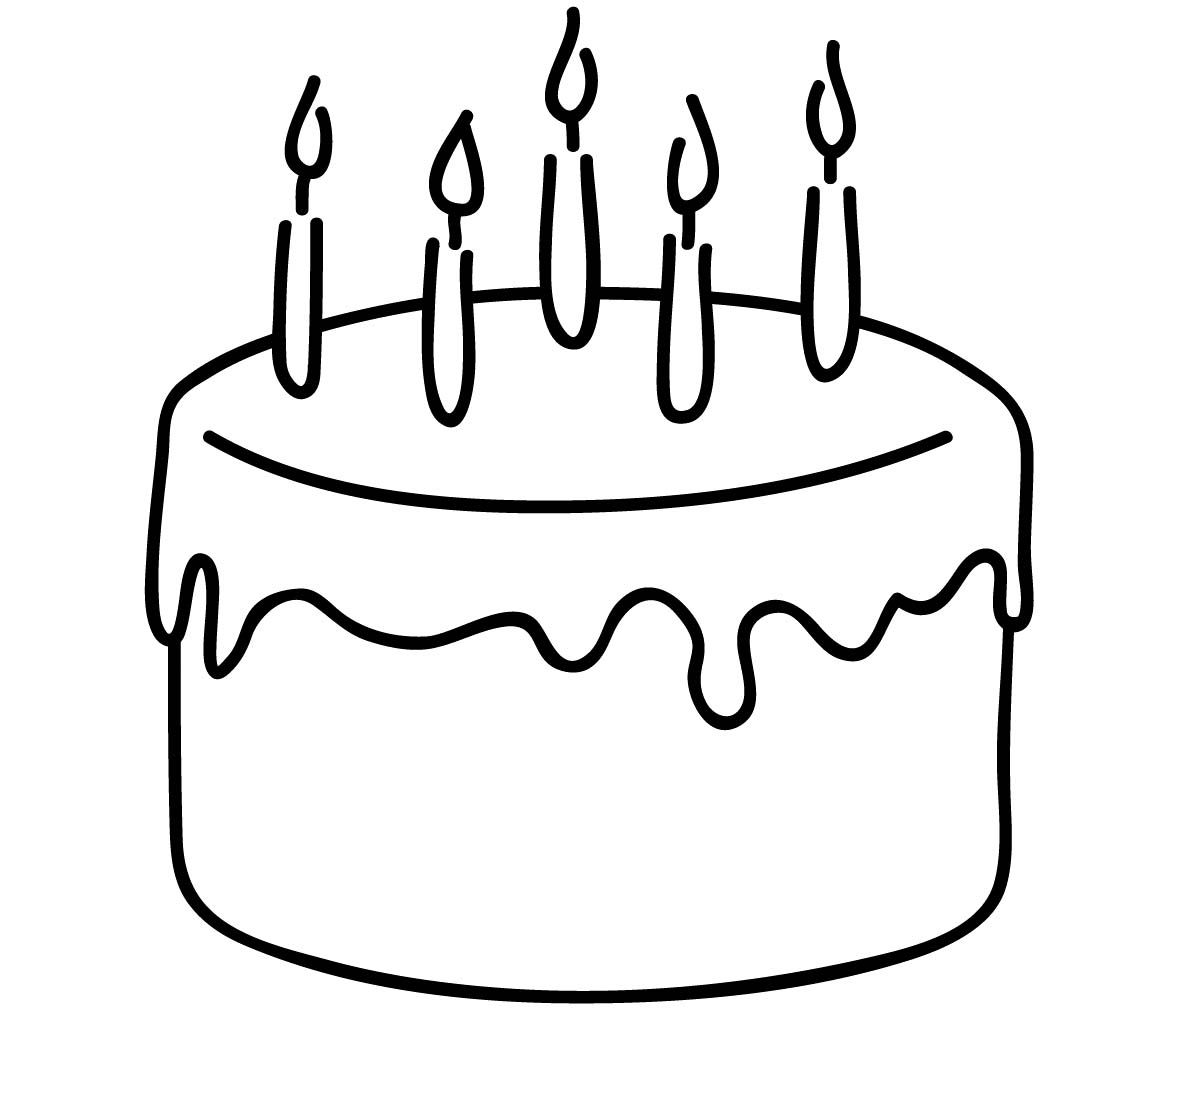 Birthday that is and. Cake clipart simple